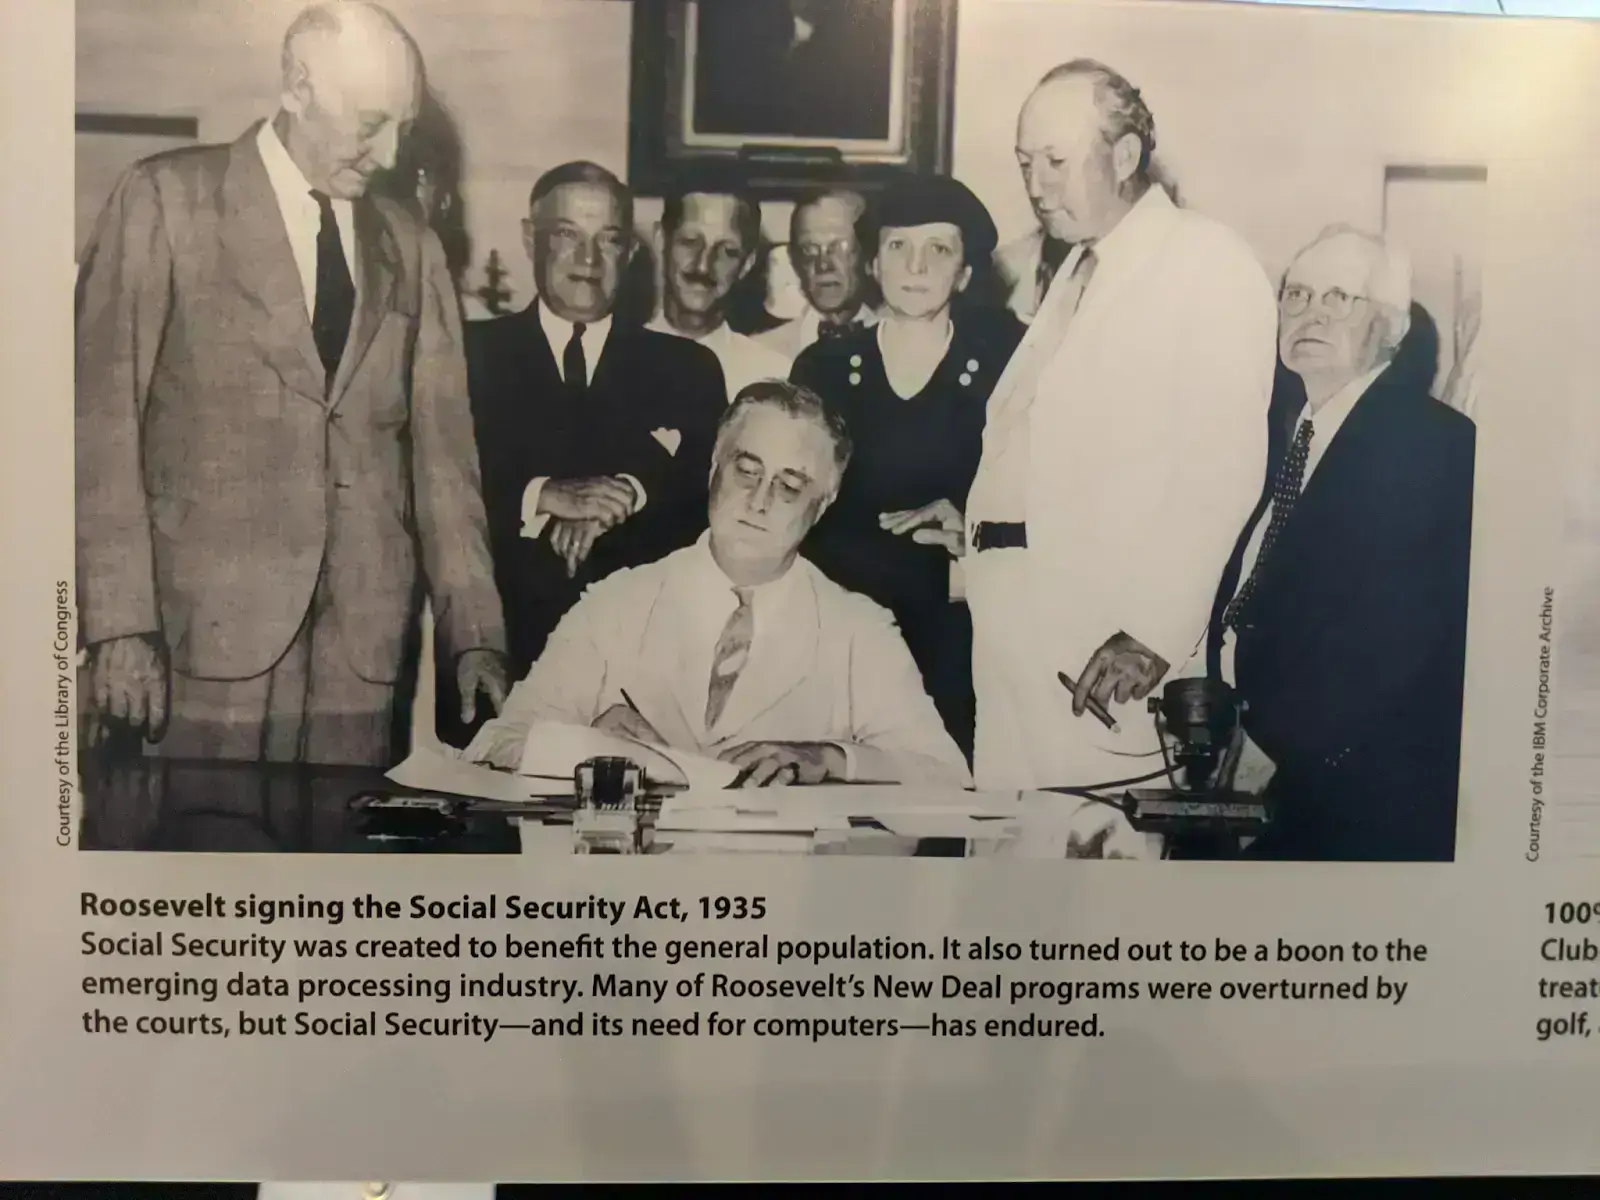 Roosevelt Signing the Social Security Act 1935 Newspaper